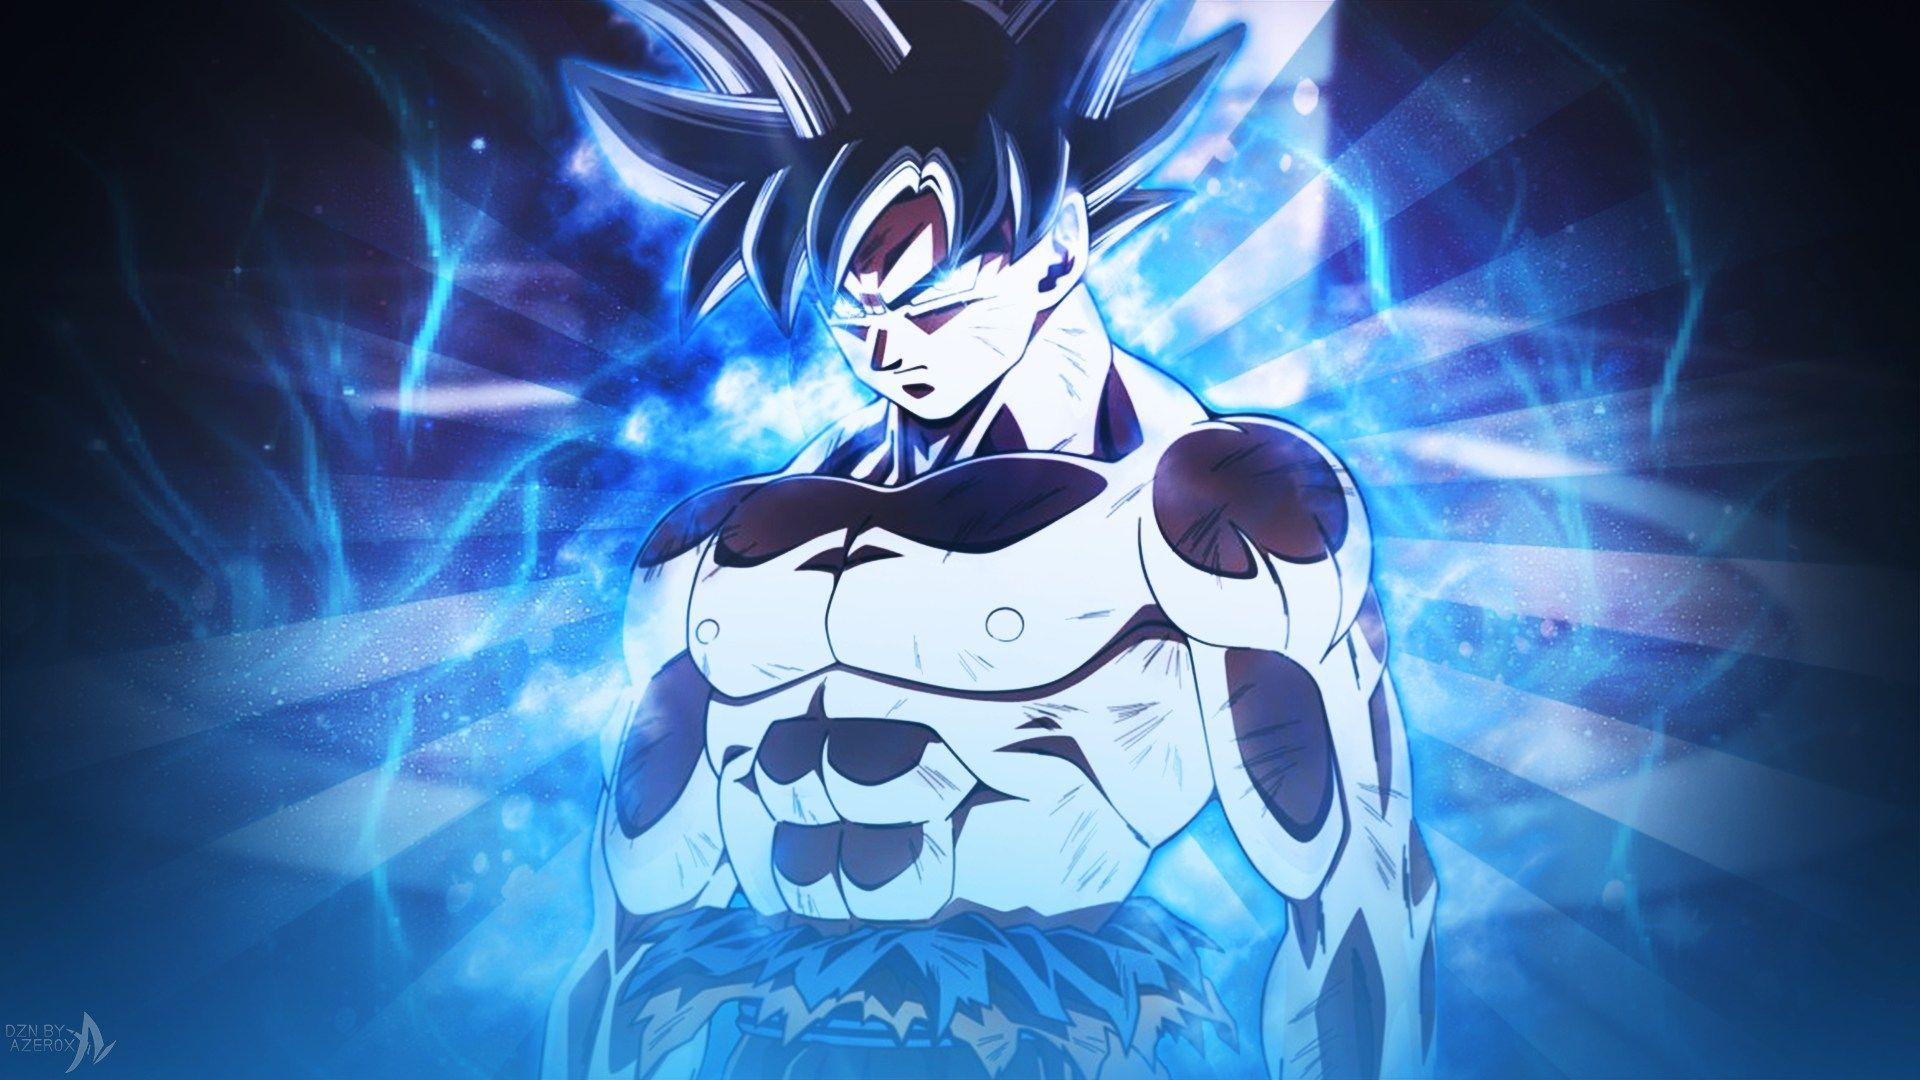 Goku New Form Wallpapers - Top Free Goku New Form Backgrounds ...